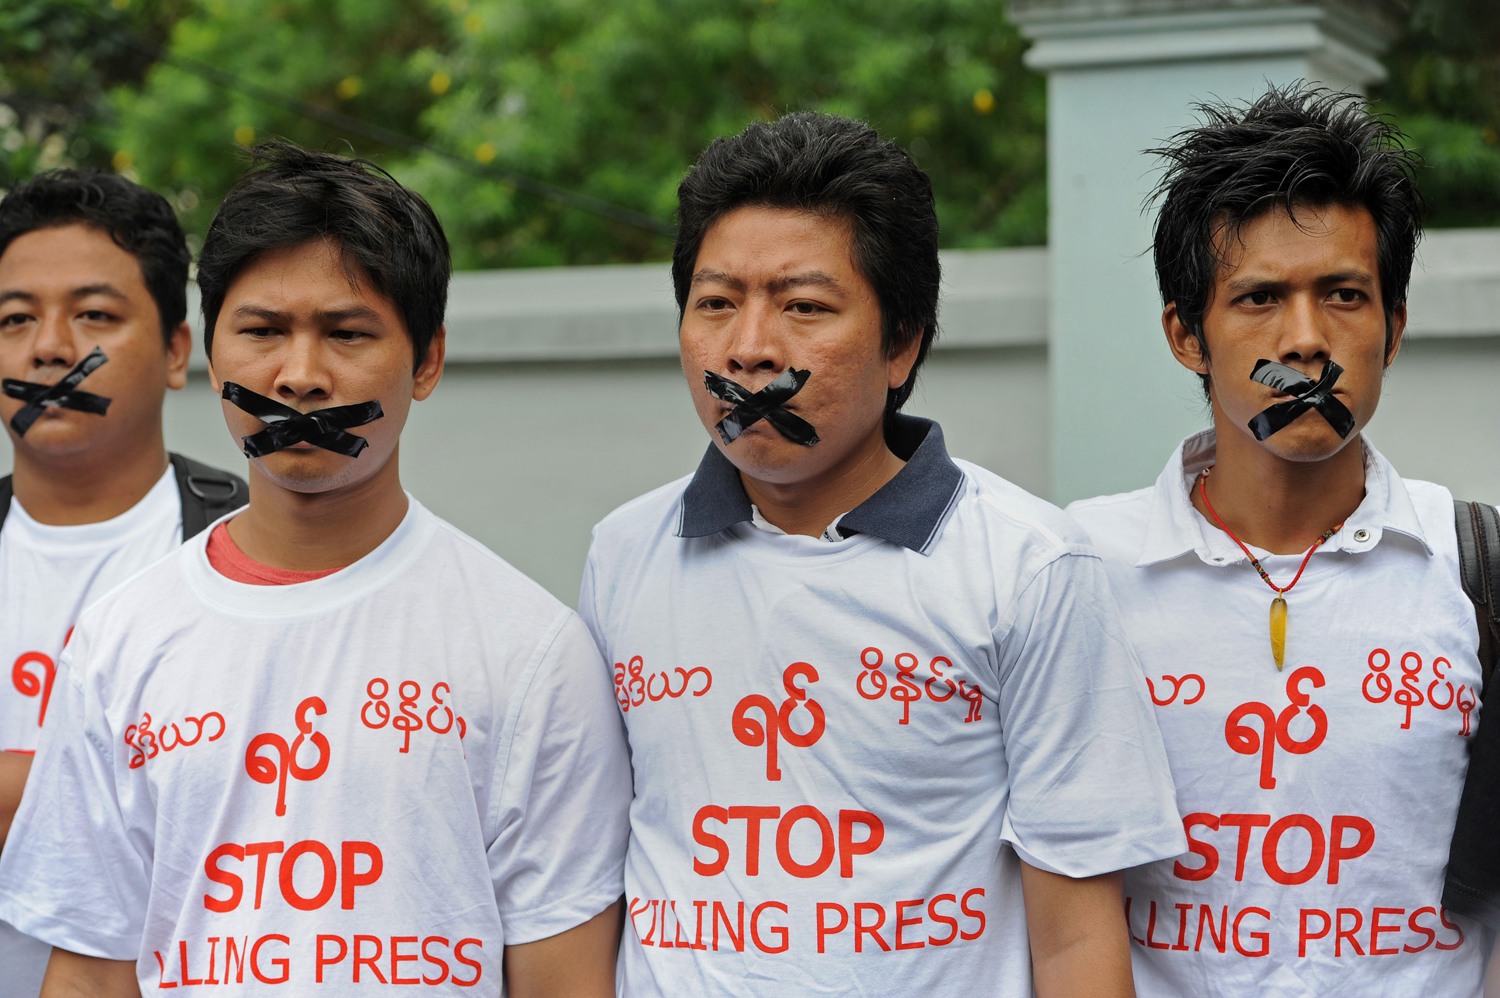 Burmese journalists wear T-shirts that say "Stop Killing Press" during a silent protest for five journalists who were jailed for 10 years on July 10, near the Myanmar Peace Center where Burmese President Thein Sein was scheduled to meet with local artists in Rangoon on July 12, 2014. (Soe Than Win—AFP/Getty Images)